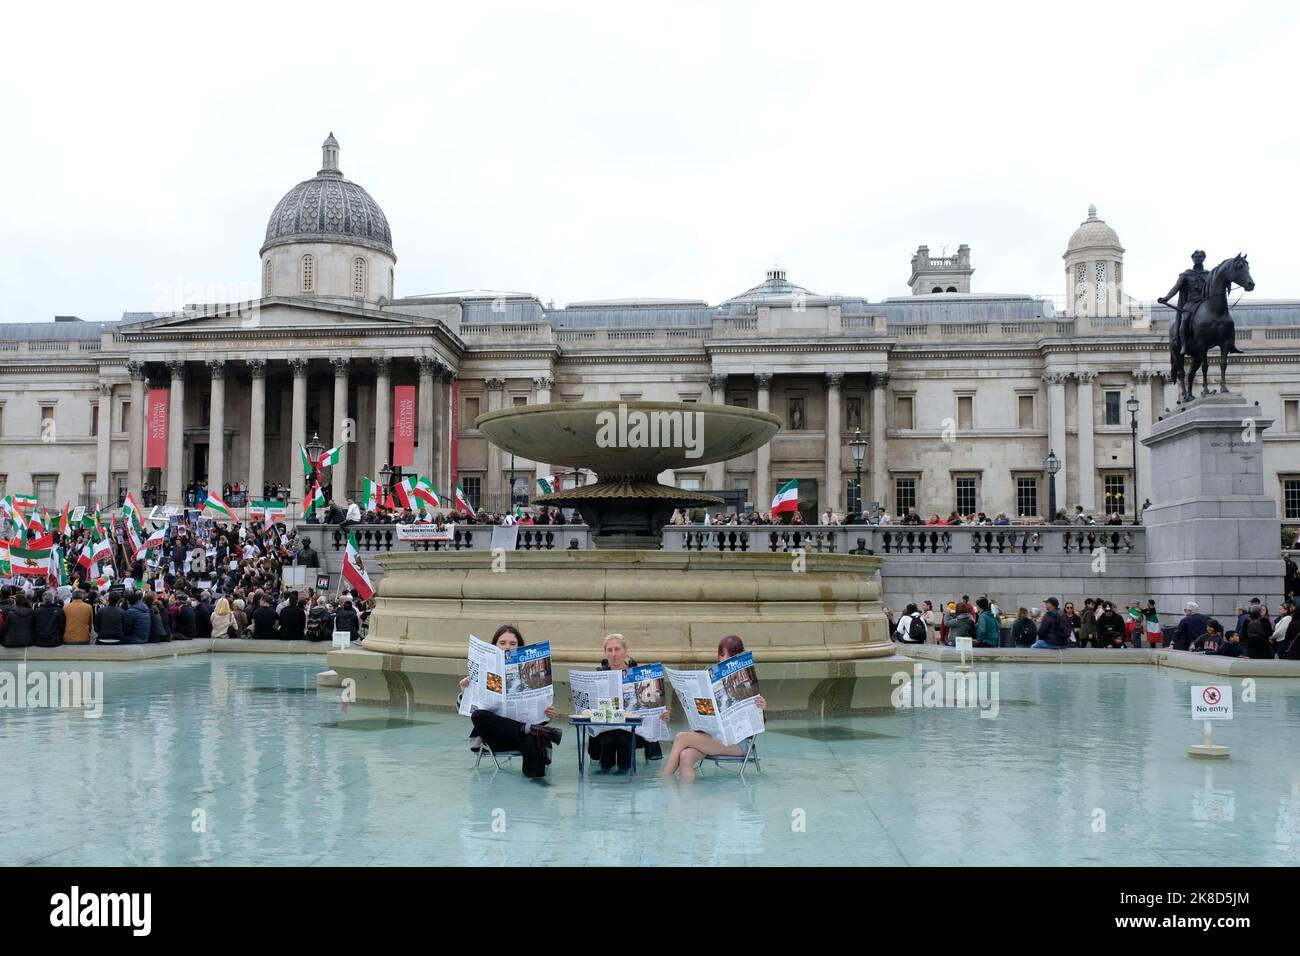 London, UK, 22nd October, 2022. Animal Rebellion activists stage a demonstration in the Trafalgar Square fountain with a mock Guardian newspaper and tofu, following comments made by former Home Secretary Suella Braverman criticising protesters. The group urges government action to transition from animal farming towards a plant-based food system. Credit: Eleventh Hour Photography/Alamy Live News Stock Photo